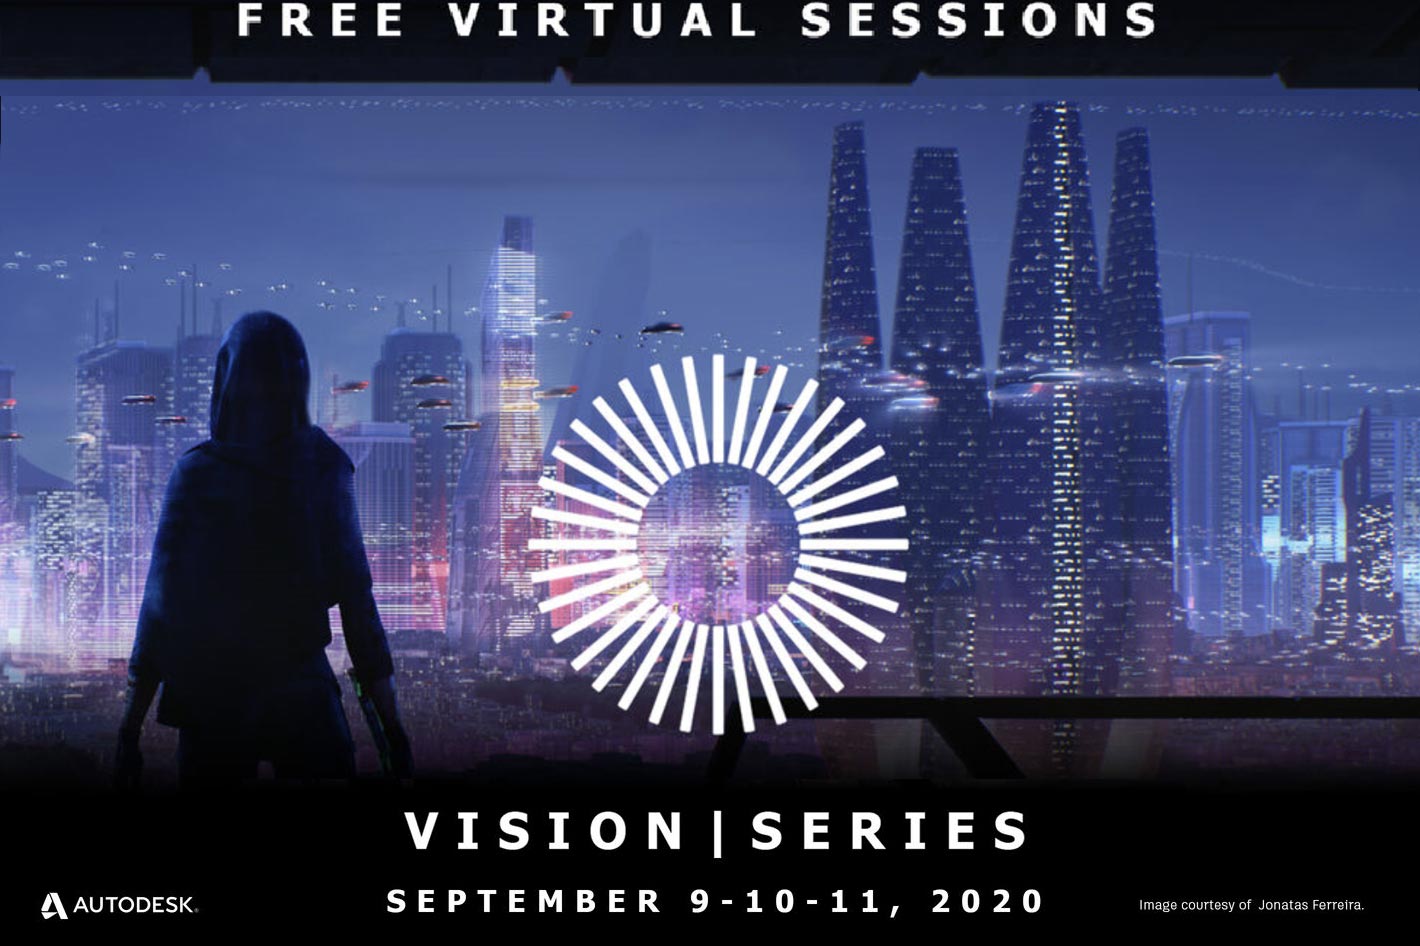 Autodesk Vision Series goes virtual this September